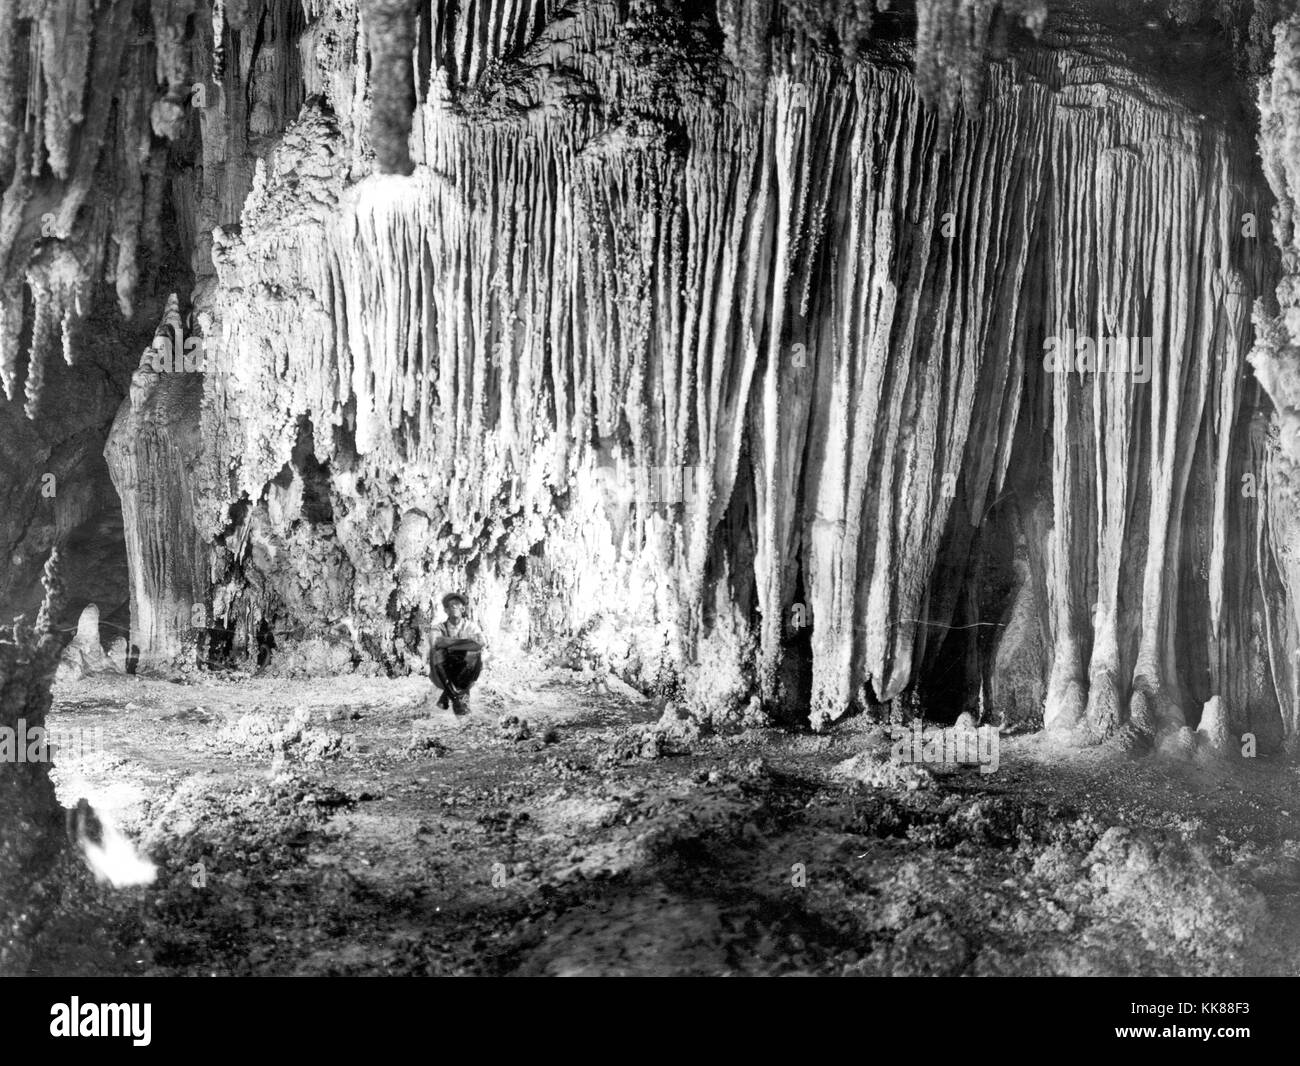 View inside Carlsbad Caverns National Park, New Mexico, showing a wall in the chambers known as Shinav's Wigwam (from Shinav, a mythical deity of the Navajo Indians). The stalactites have grown together laterally to form a solid curtain-like mass. Image courtesy USGS. 1923. Stock Photo